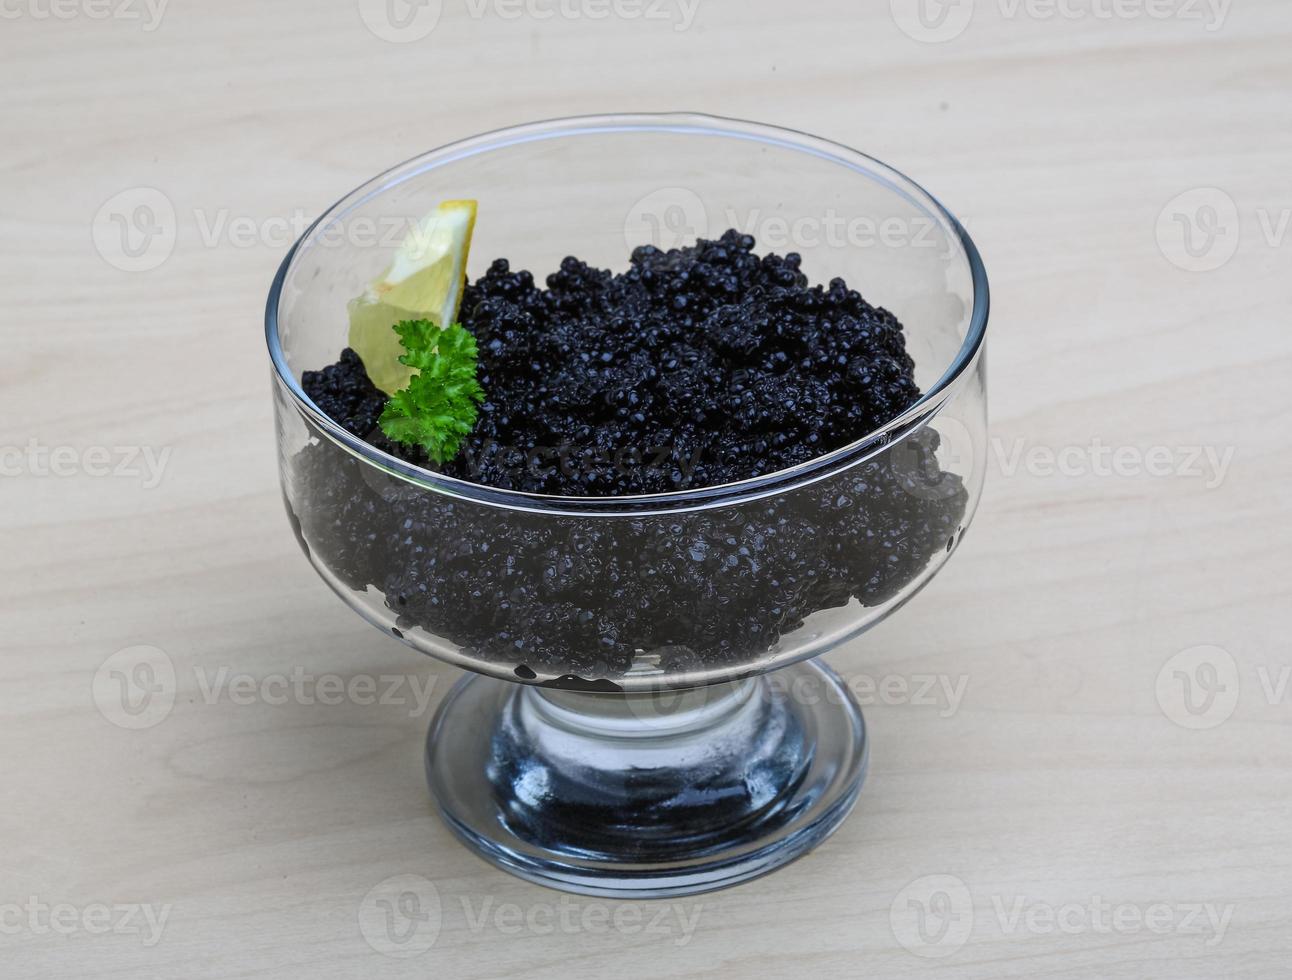 Black caviar in a bowl on wooden background photo